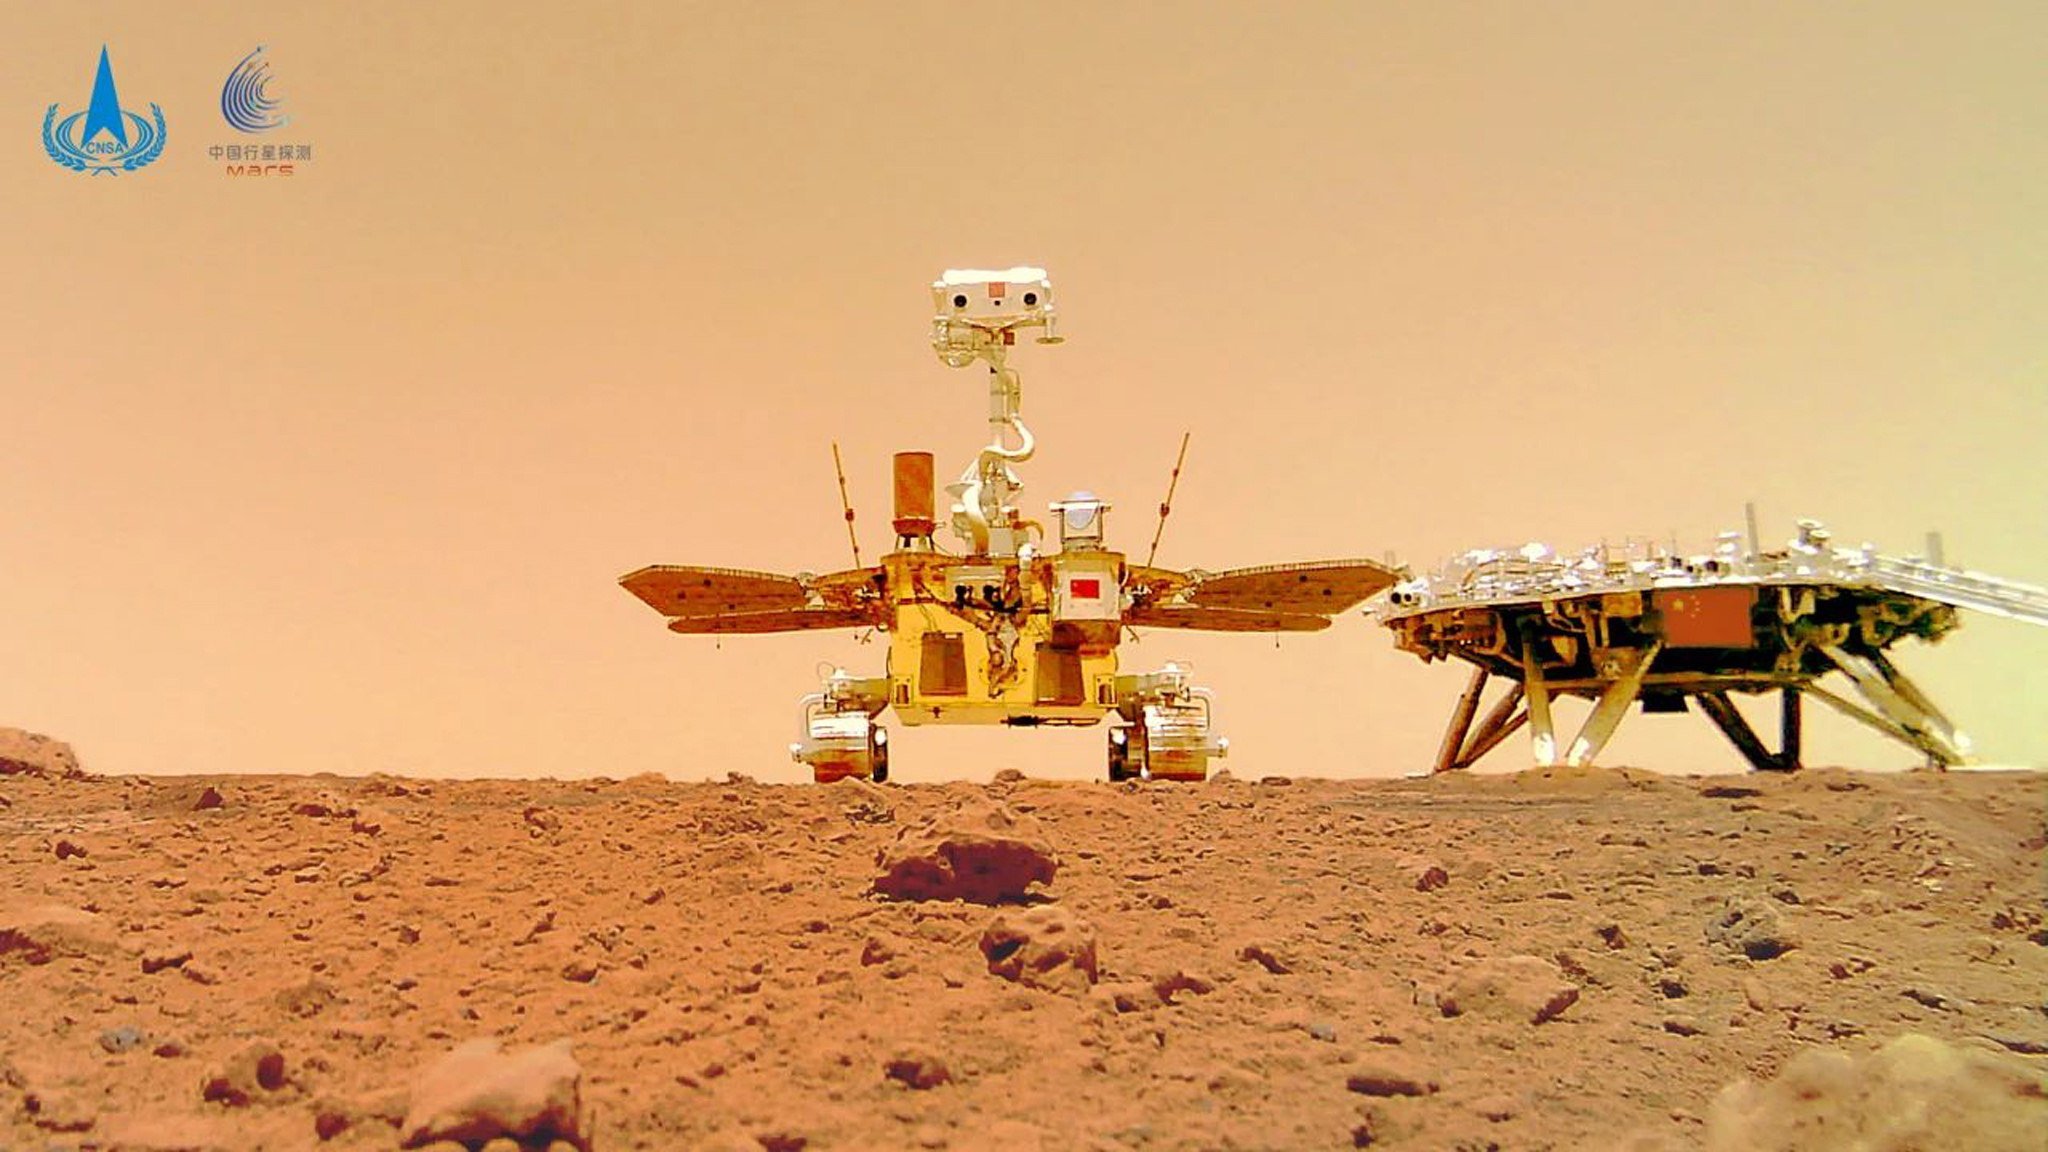 The Zhu Rong Mars Rover, pictured next to the landing platform, on the surface of the red planet.
Photo: EPA-EFE